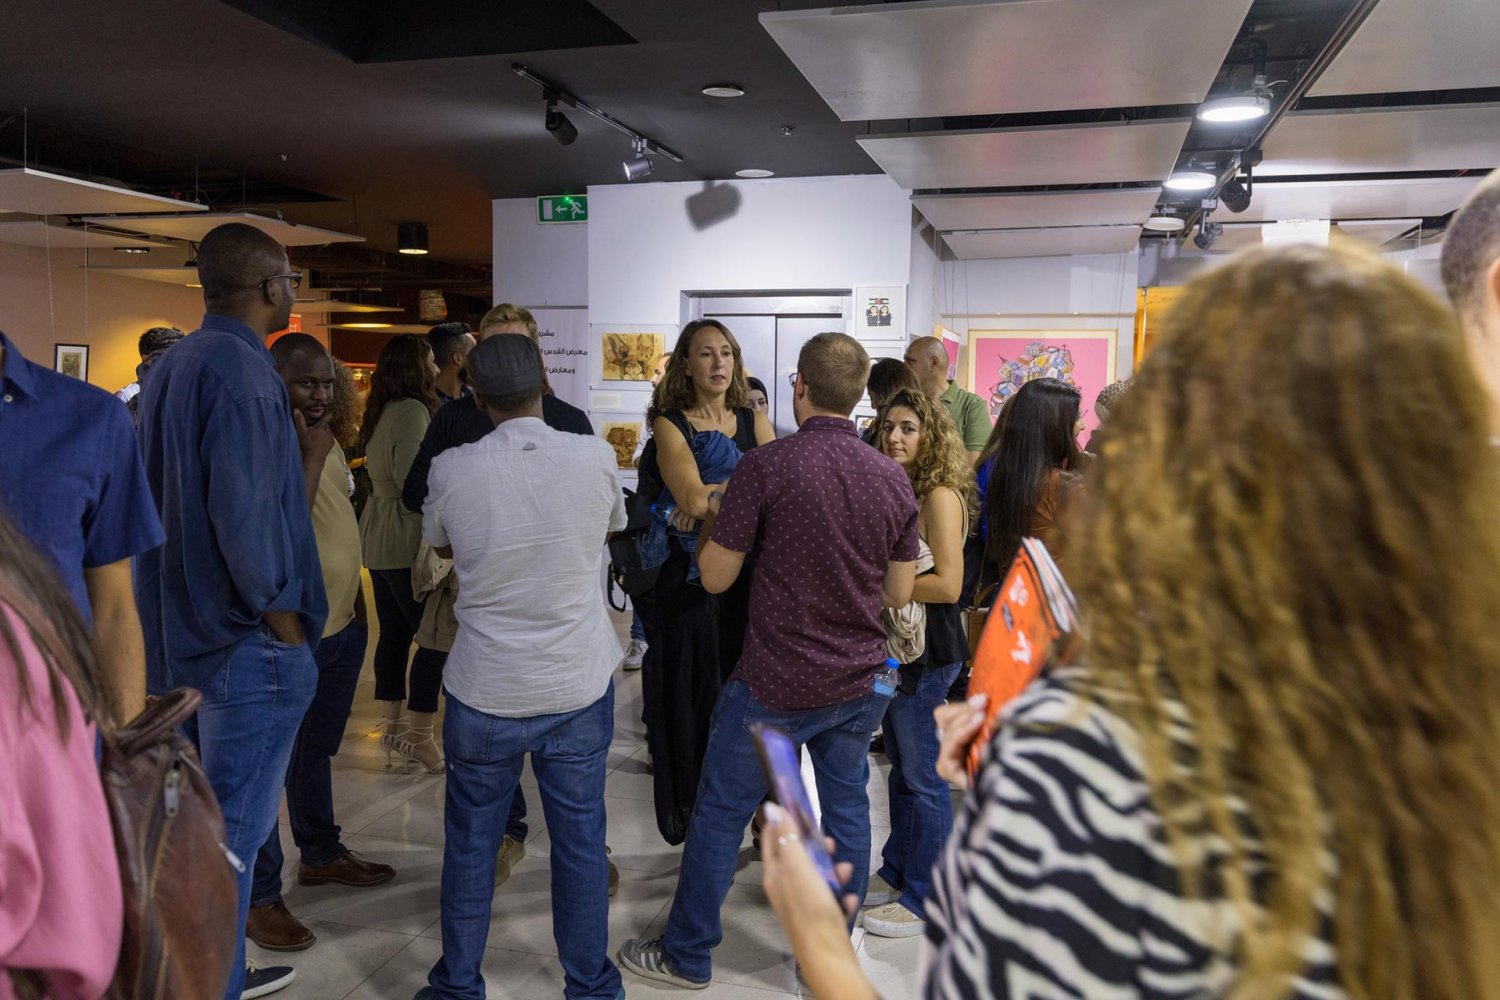 Attendees enjoy the “Swarm” exhibit that ran in conjunction with a music festival in Jerusalem on September 16–21, 2022.